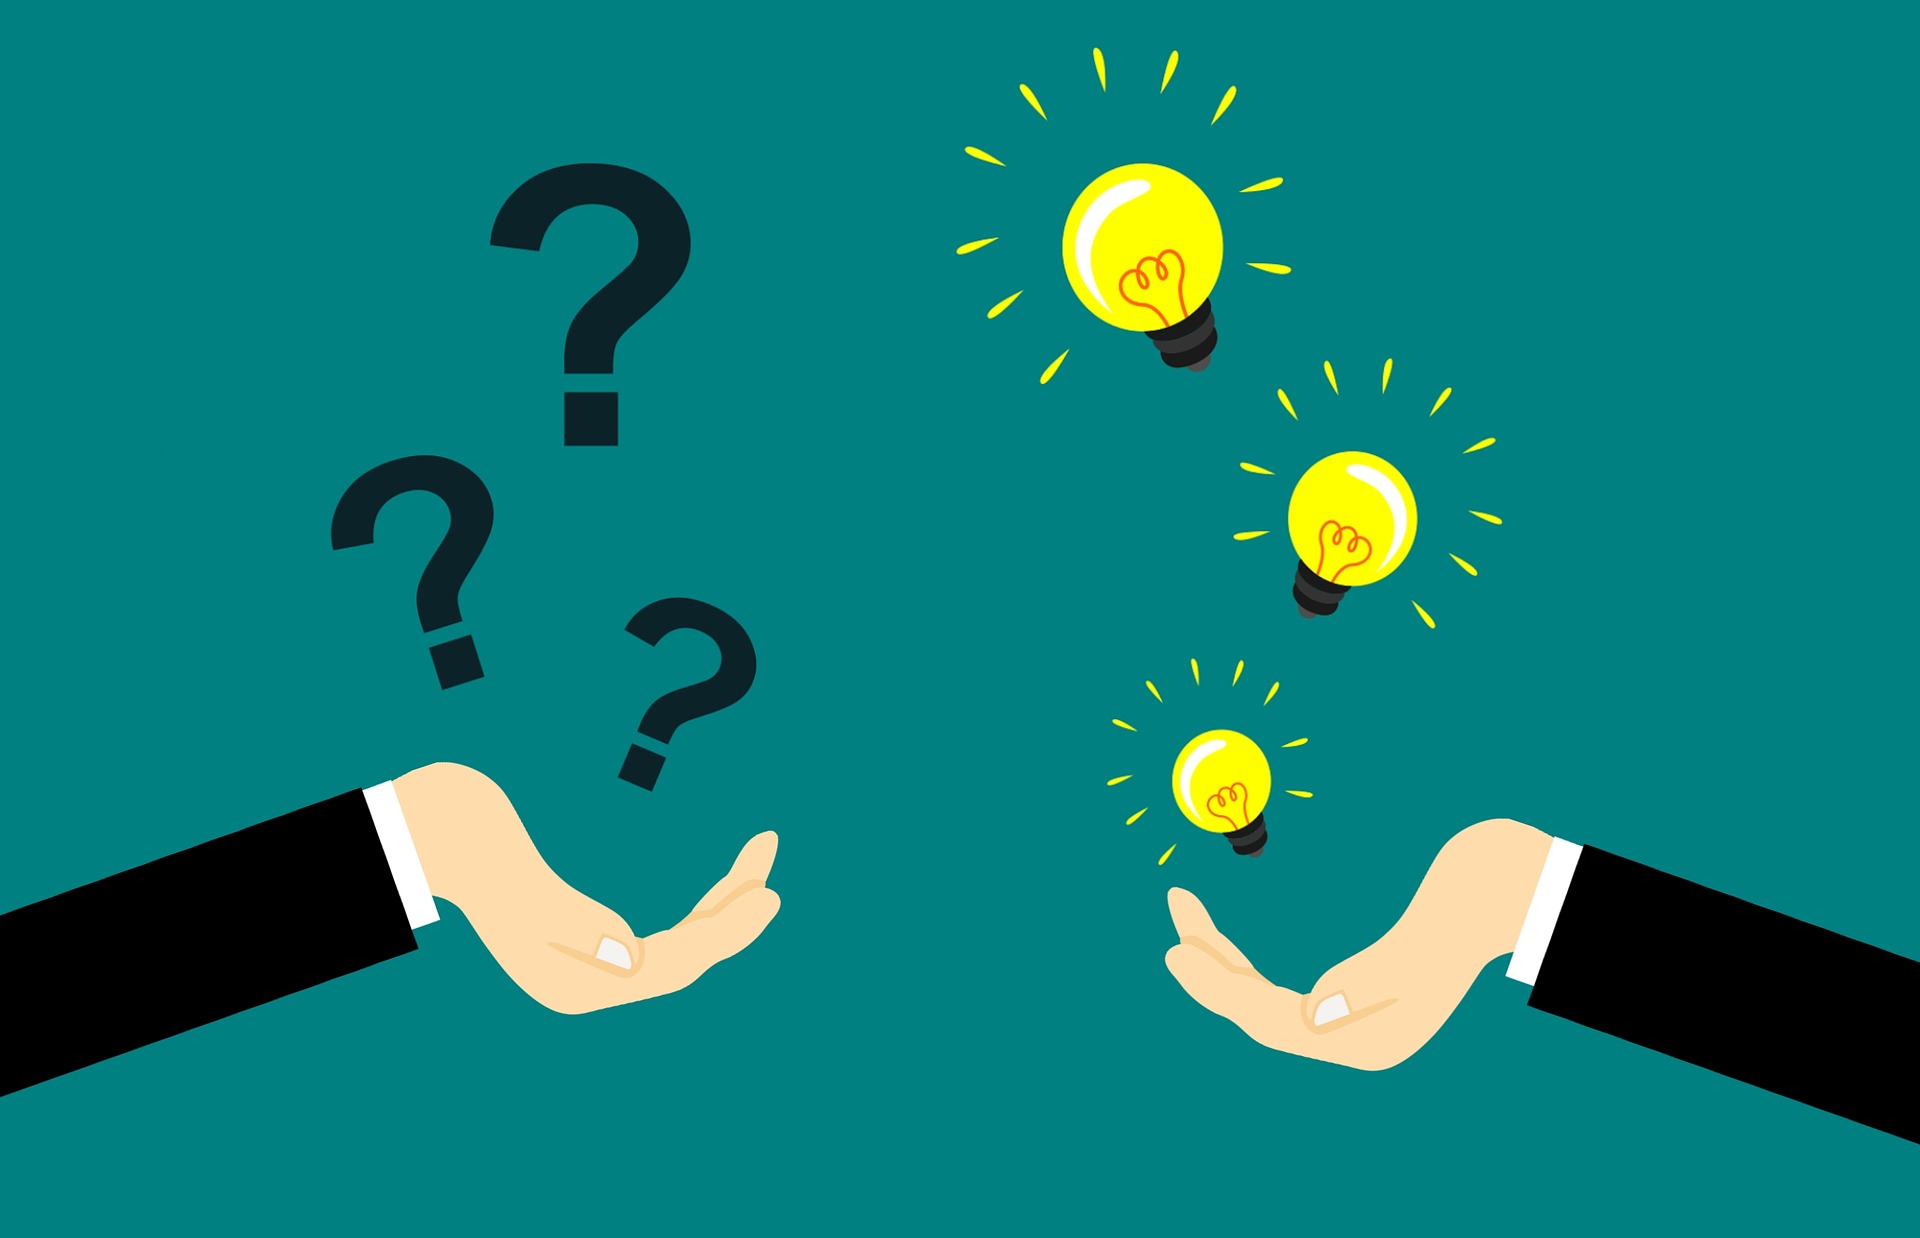 An image of a hand holding question marks and a hand holding lightbulbs to represent the clairty that comes when an Agile Journey is aligned around a compelling purpose.